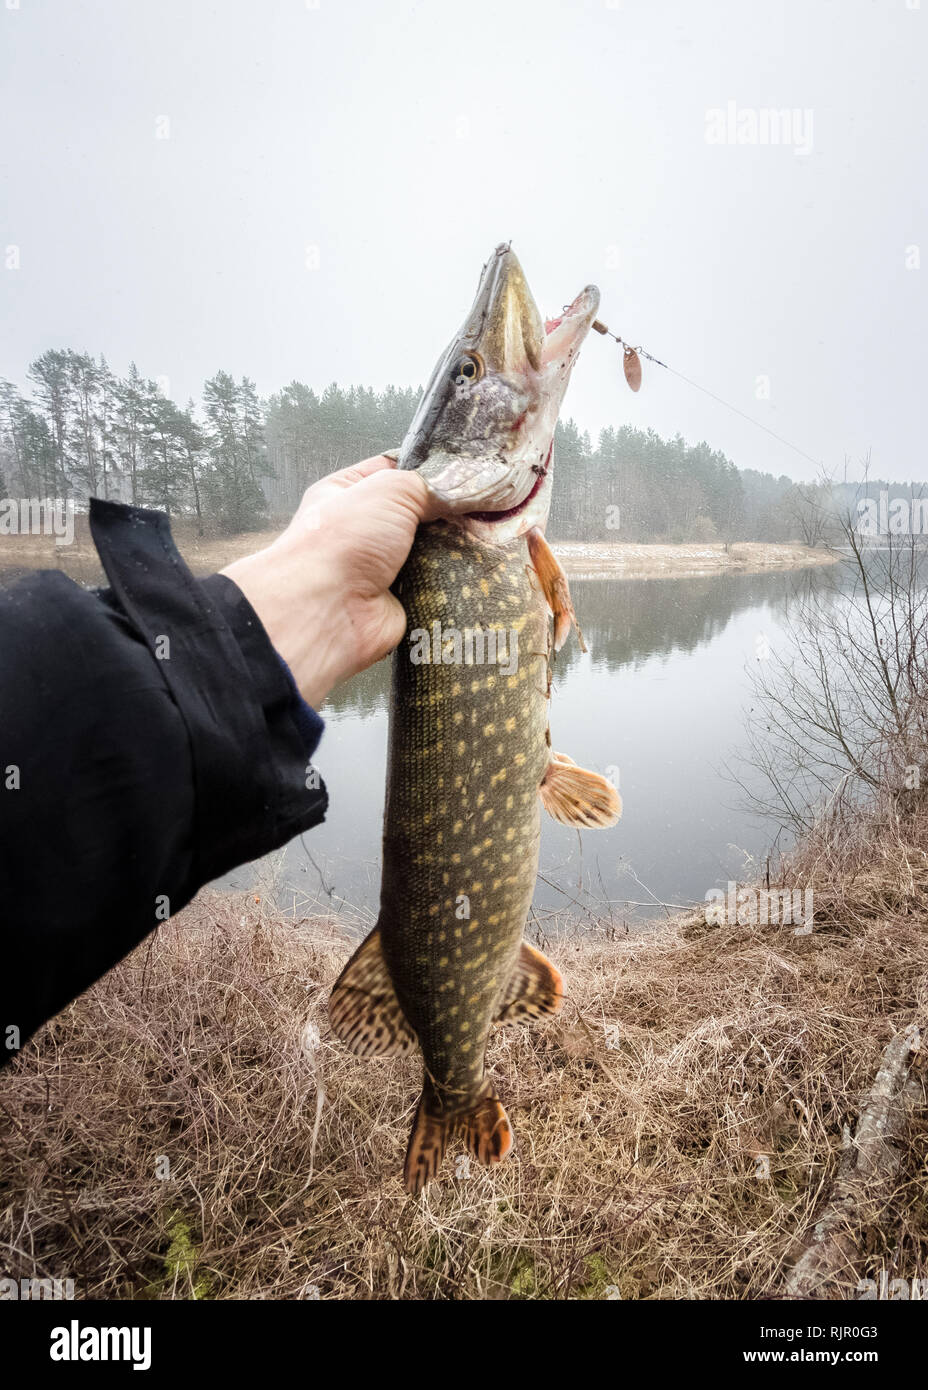 https://c8.alamy.com/comp/RJR0G3/fishing-in-the-river-open-mouthed-large-pike-in-the-fishermans-hand-fishing-trophies-caught-in-fresh-water-hand-of-angler-above-the-water-fisher-RJR0G3.jpg